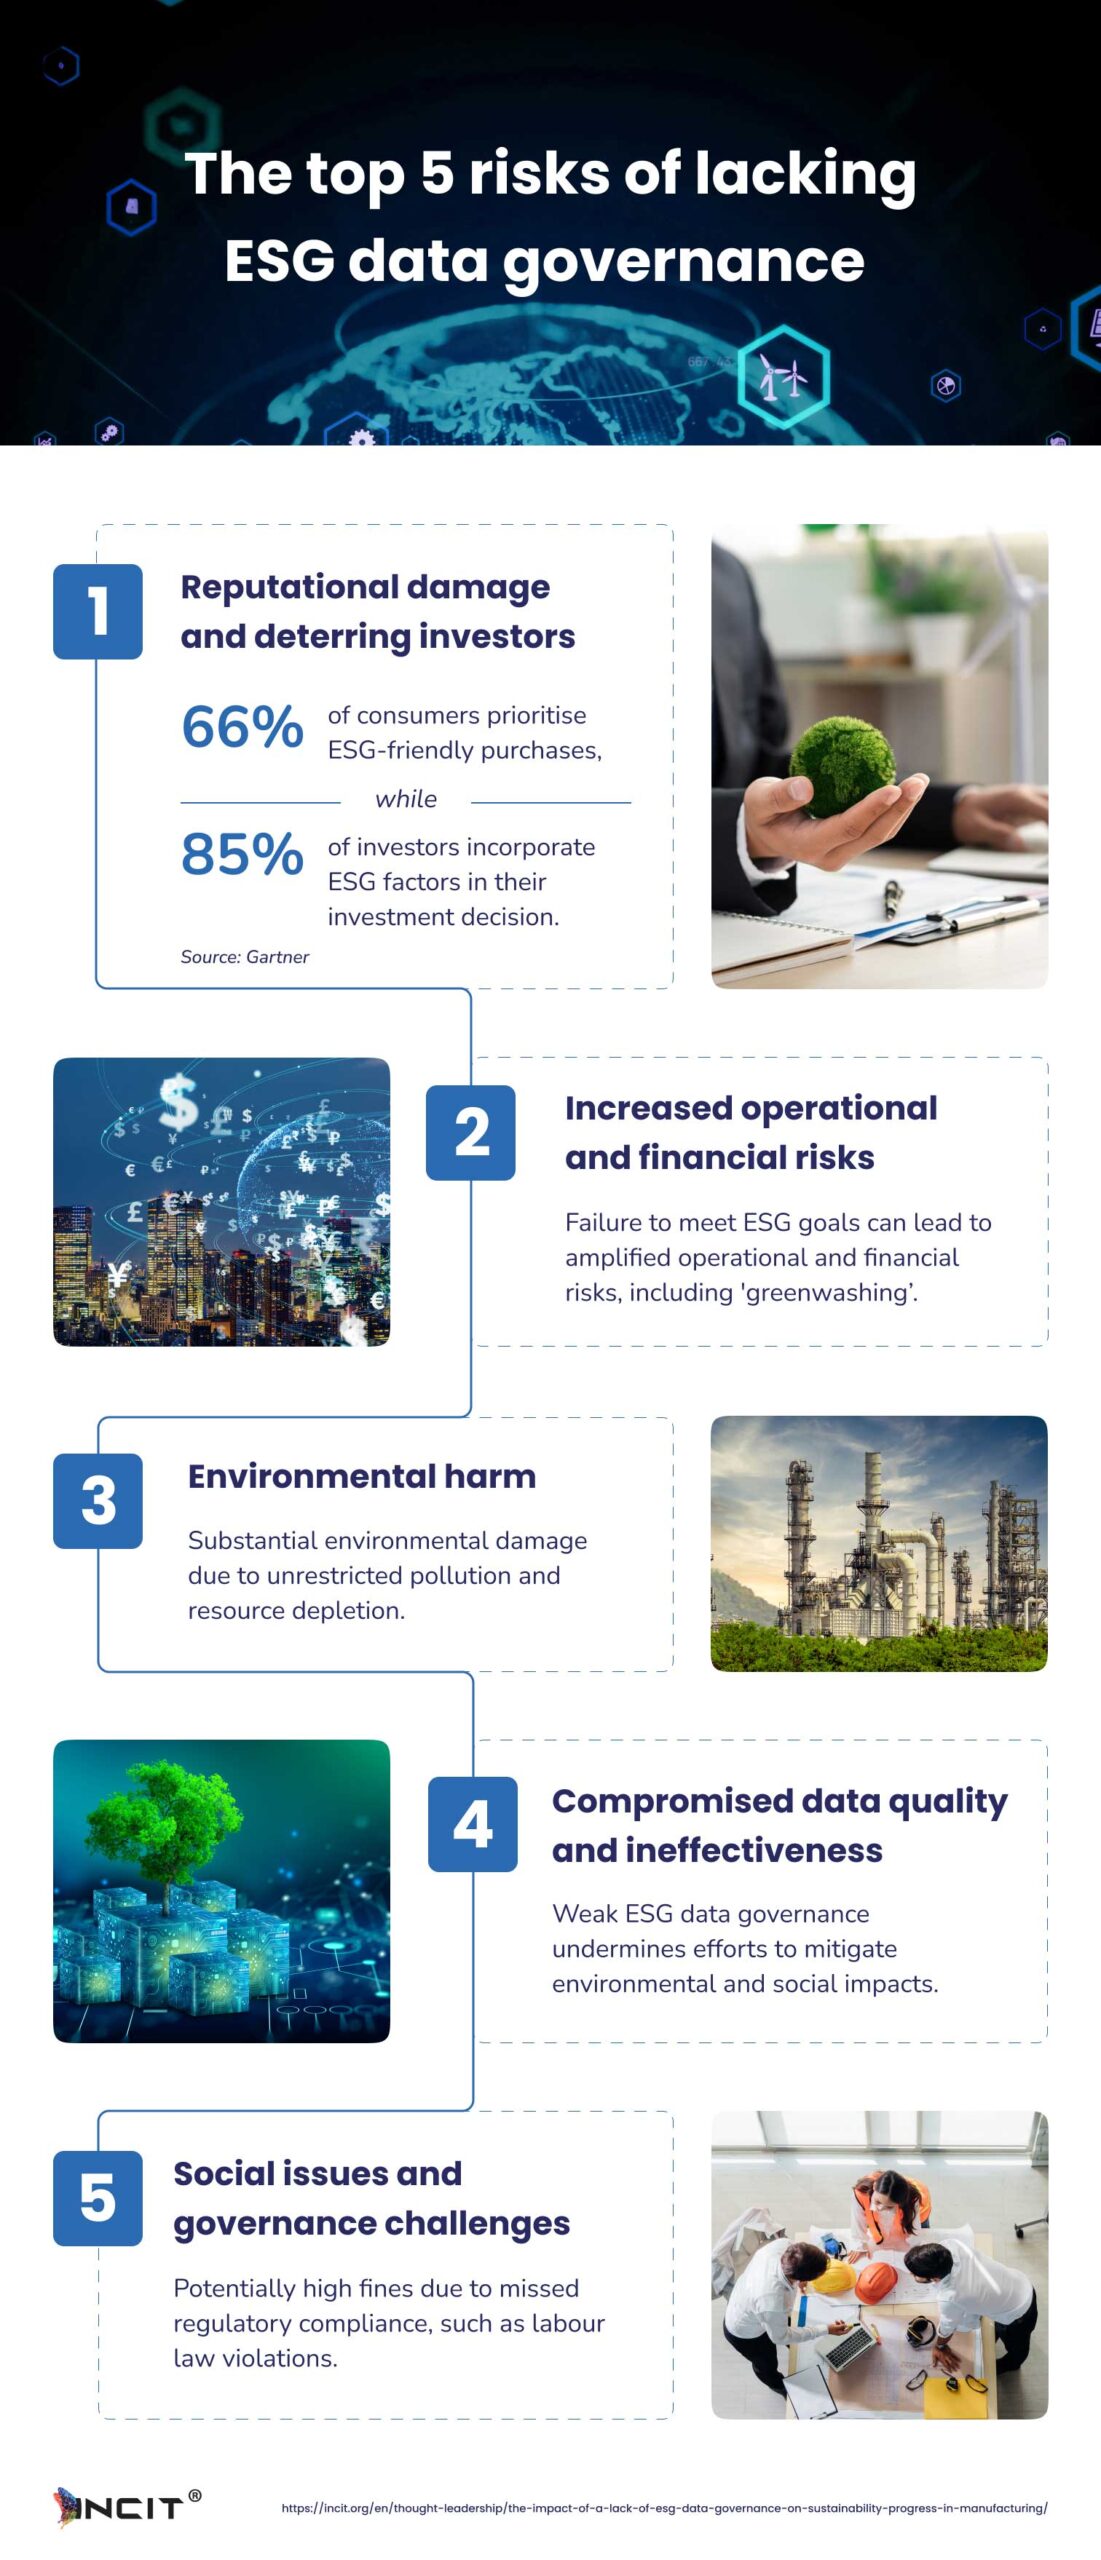 Infographic titled "The top 5 risks of lacking ESG data governance," detailing risks: 1) Reputational damage, 2) Increased operational and financial risks, 3) Environmental harm, 4) Compromised data quality, 5) Social and governance challenges.